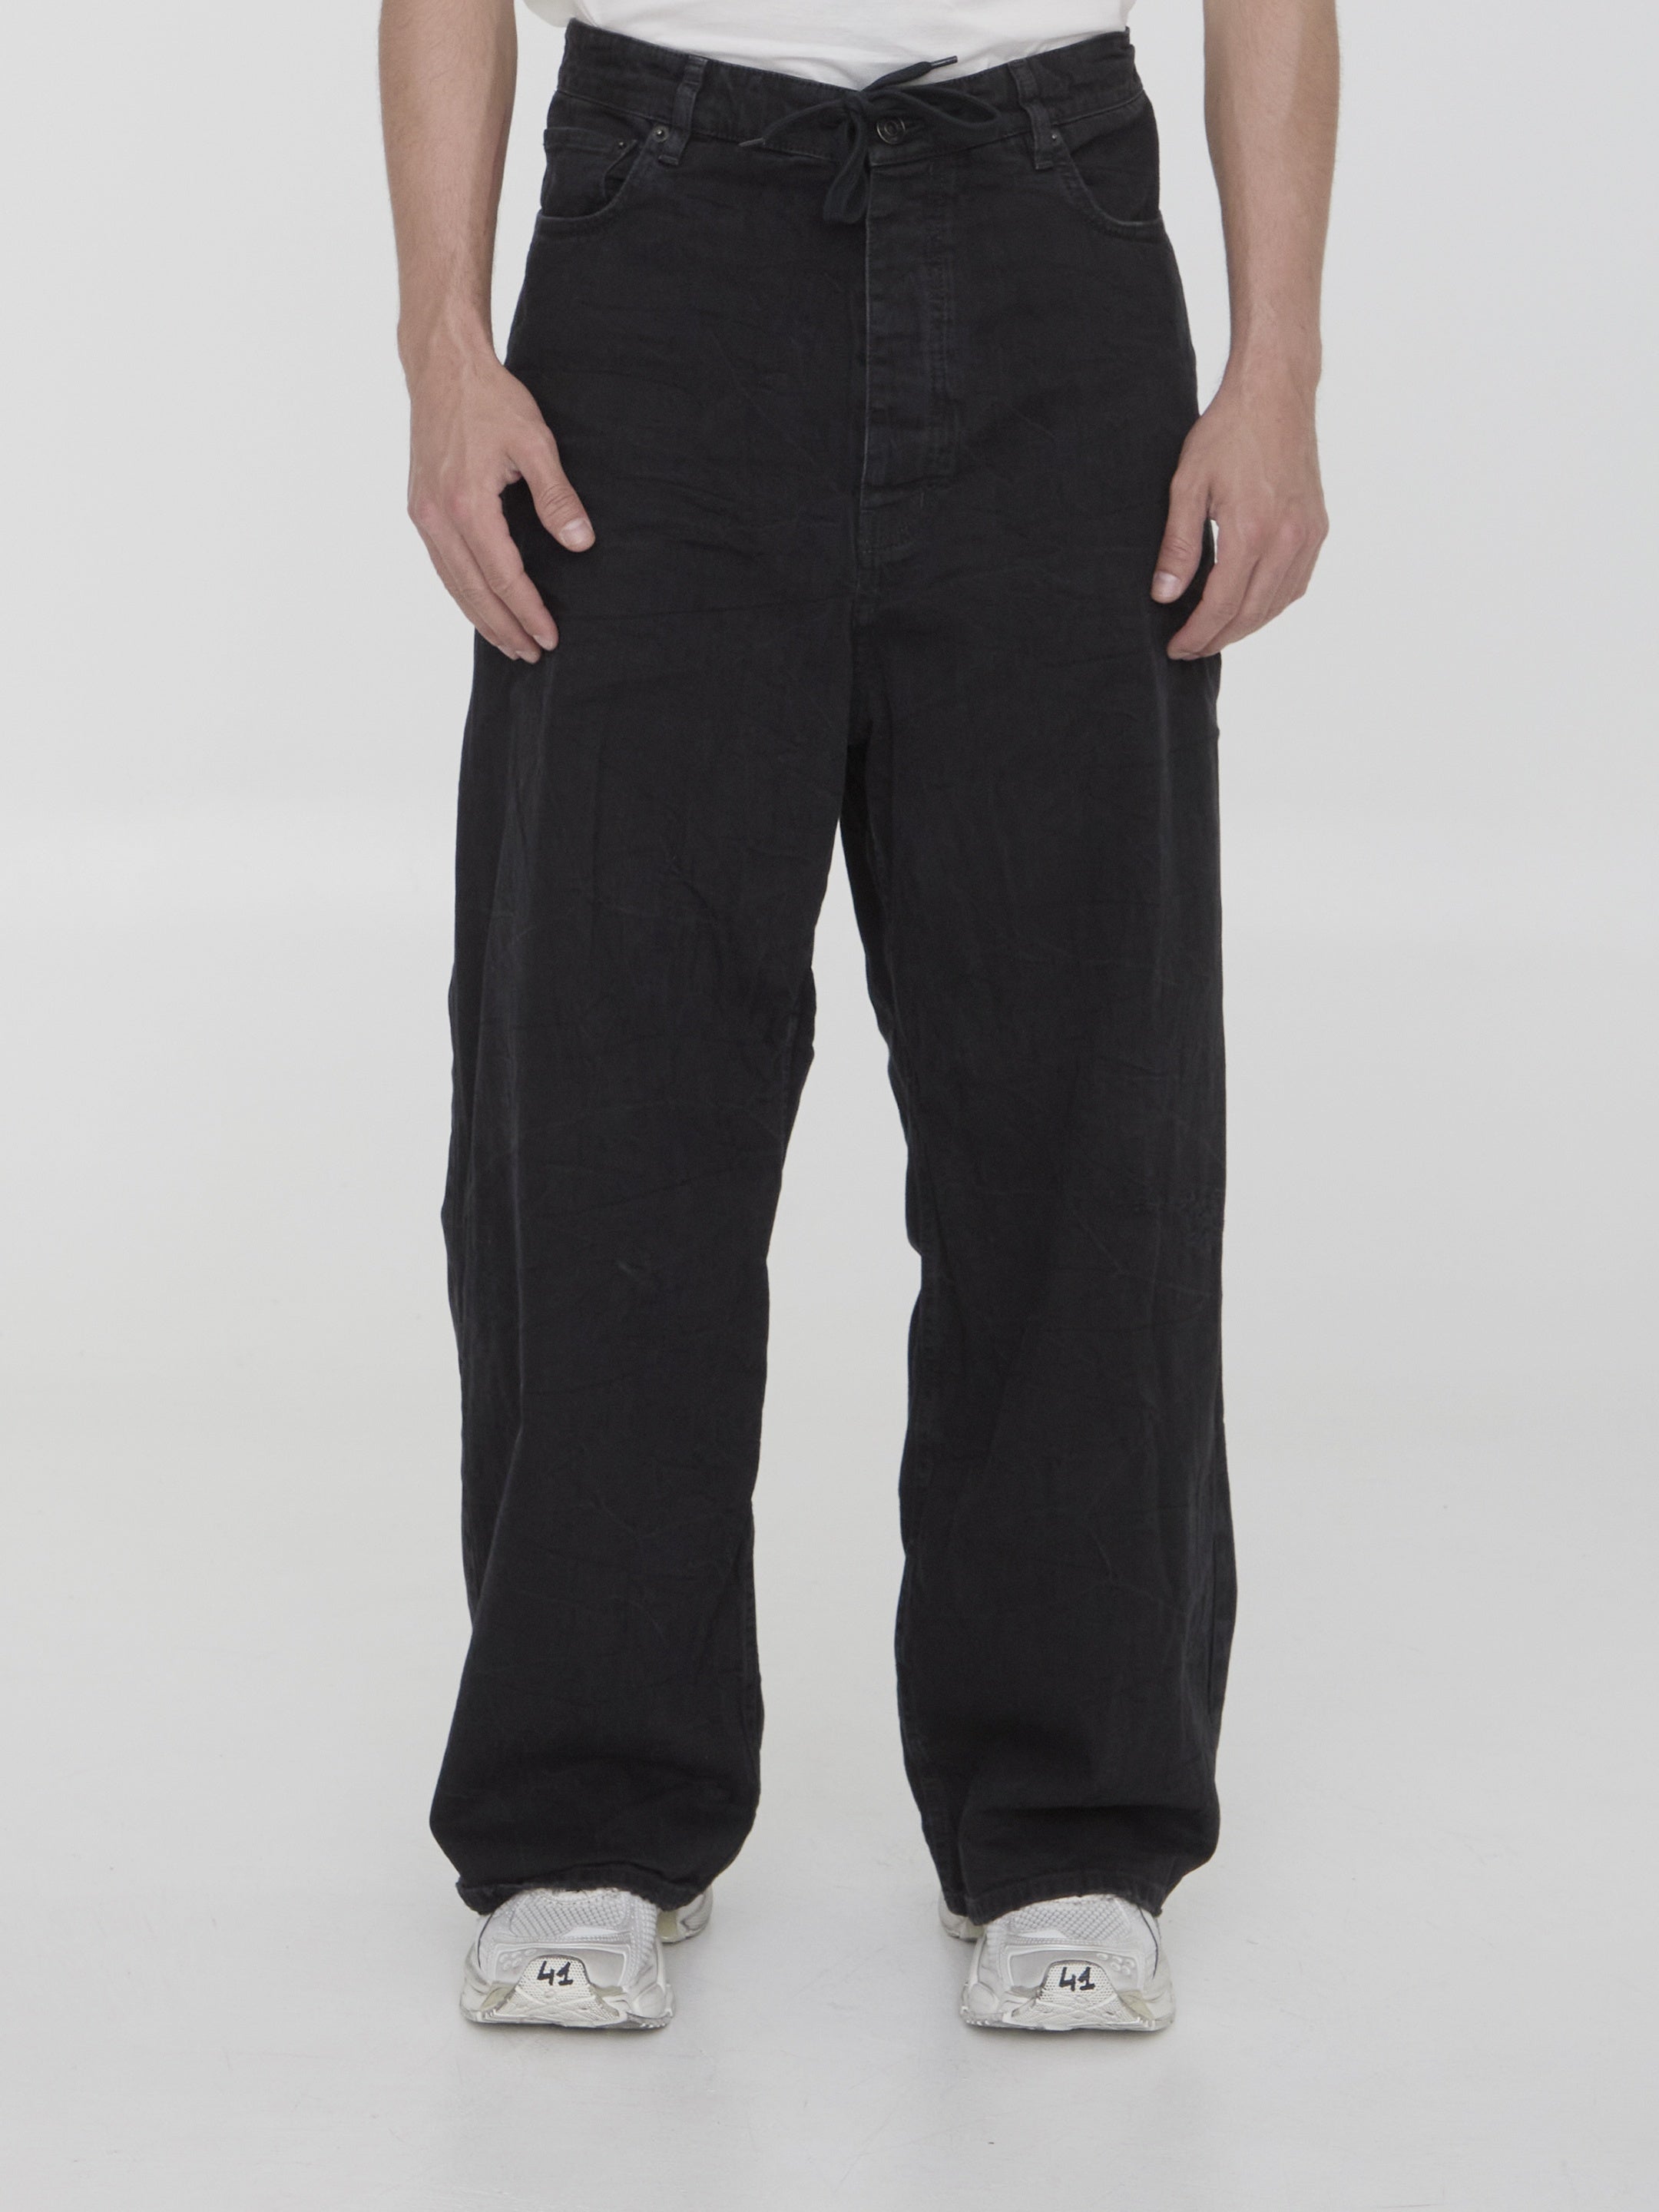 BALENCIAGA-OUTLET-SALE-Baggy-trousers-CLOTHING-S-BLACK-ARCHIVE-COLLECTION.jpg